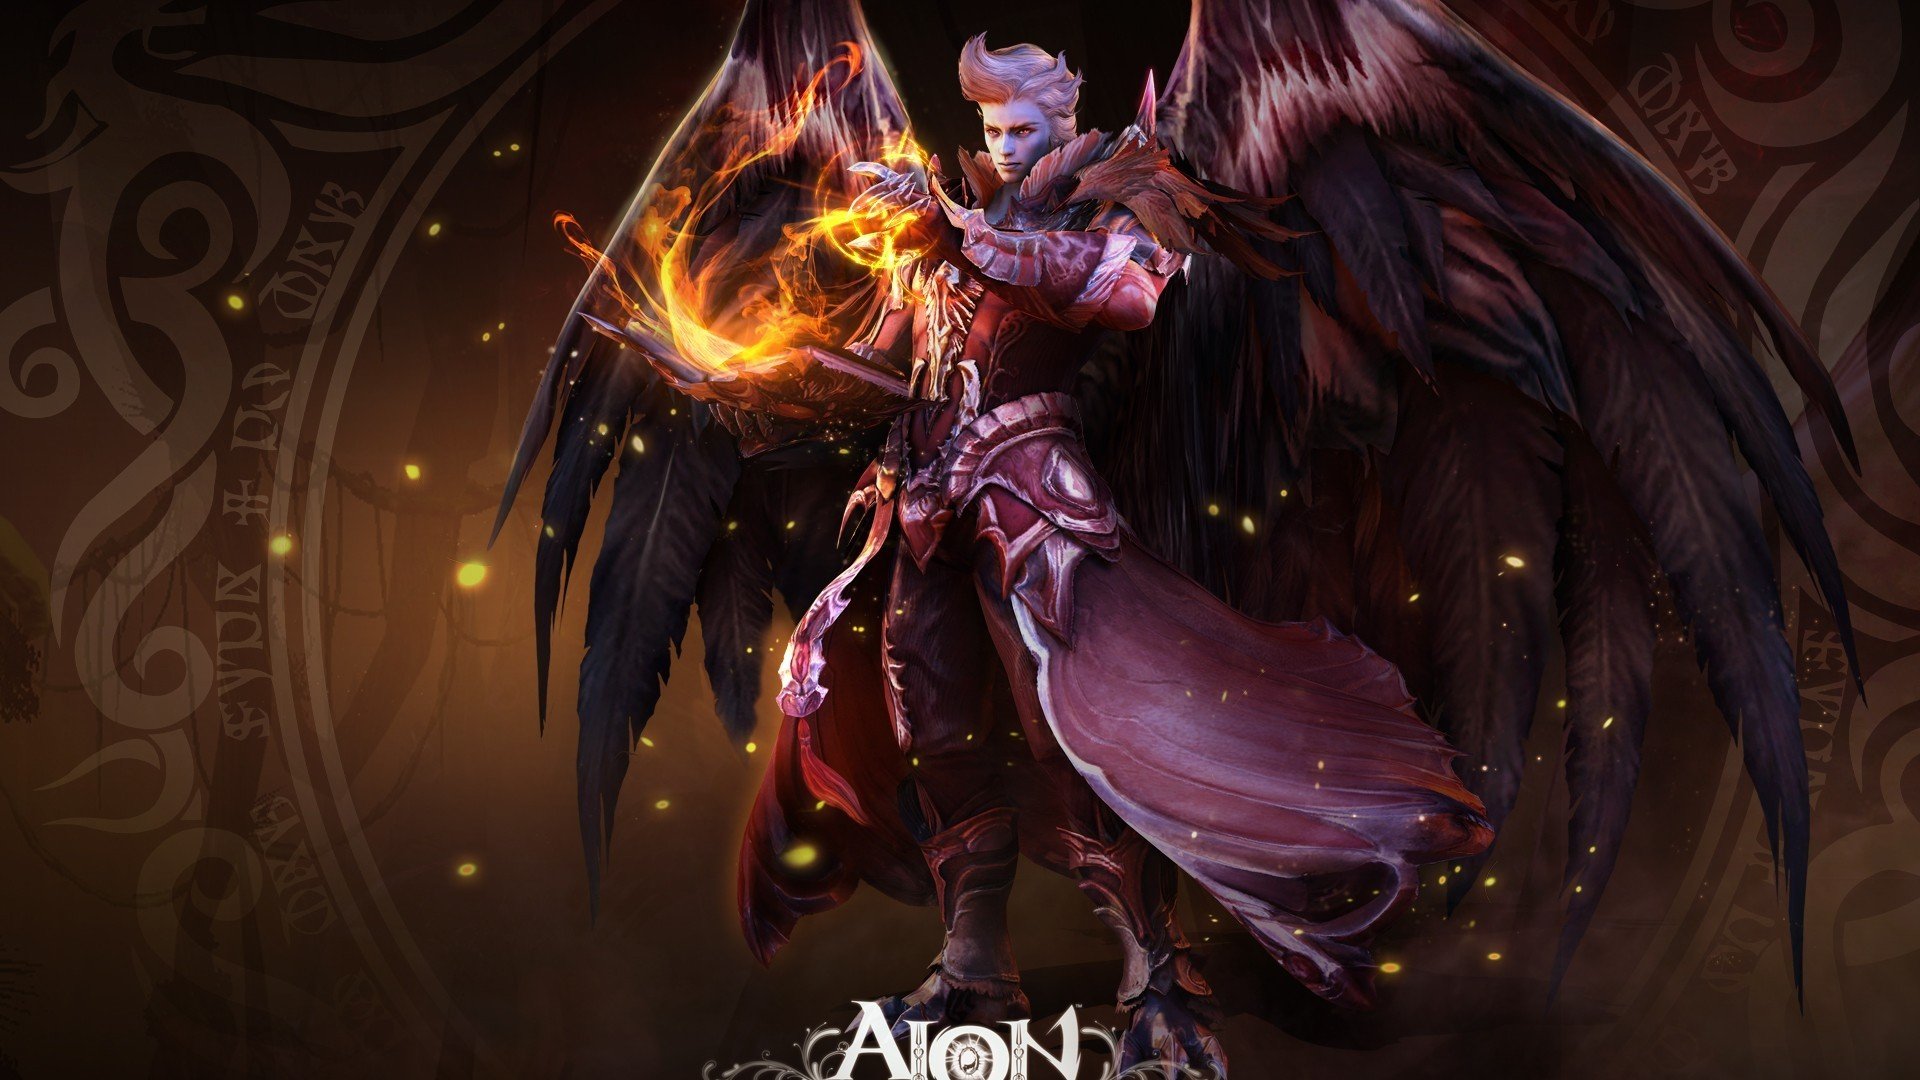 aion, Game, Video, Fantasy, Art, Artwork, Mmo, Online, Action, Fighting, Ascension, Rpg, Echoes, Eternity, Upheaval, Warrior, Magic, Perfect Wallpaper